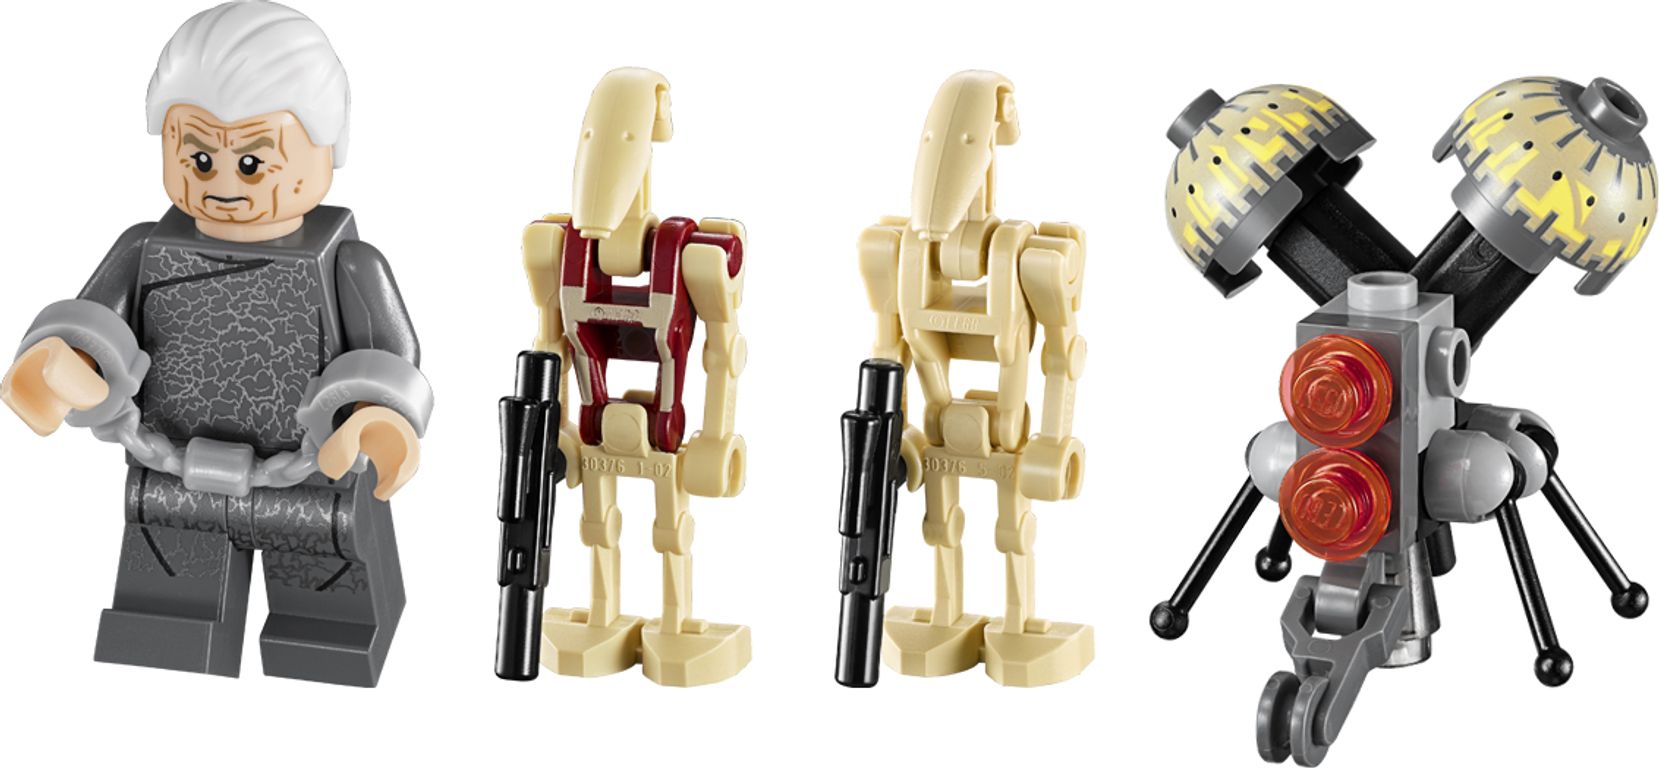 LEGO® Star Wars Droid Tri-Fighter minifigures